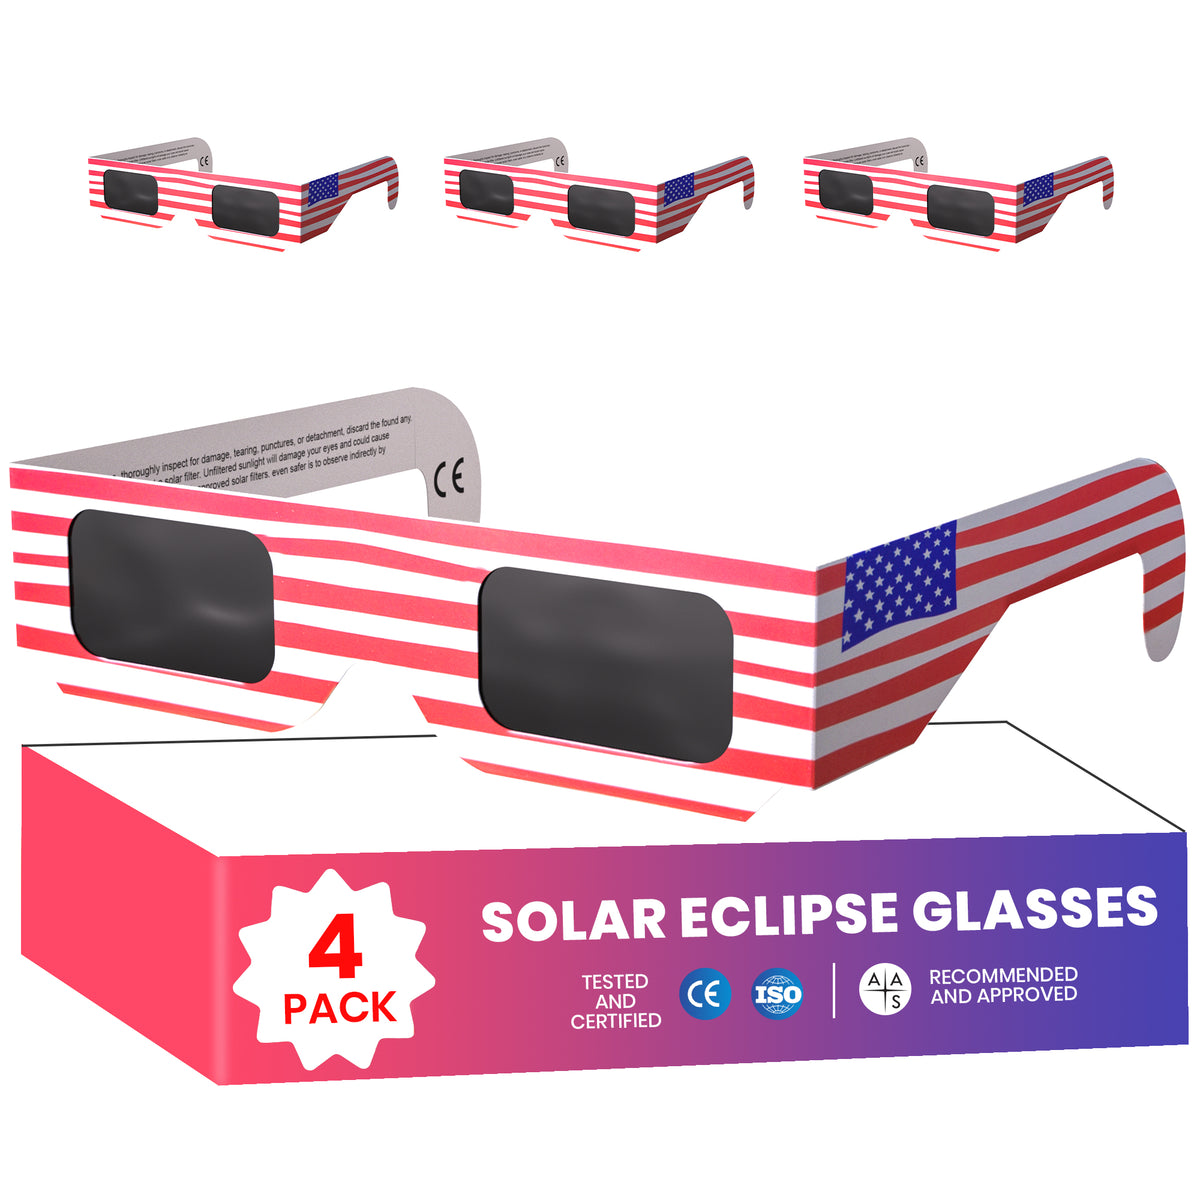 Solar Eclipse Glasses Approved 2024 CE and ISO Certified Solar Eclipse Observation Glasses Safe Shades for Direct Sun Viewing